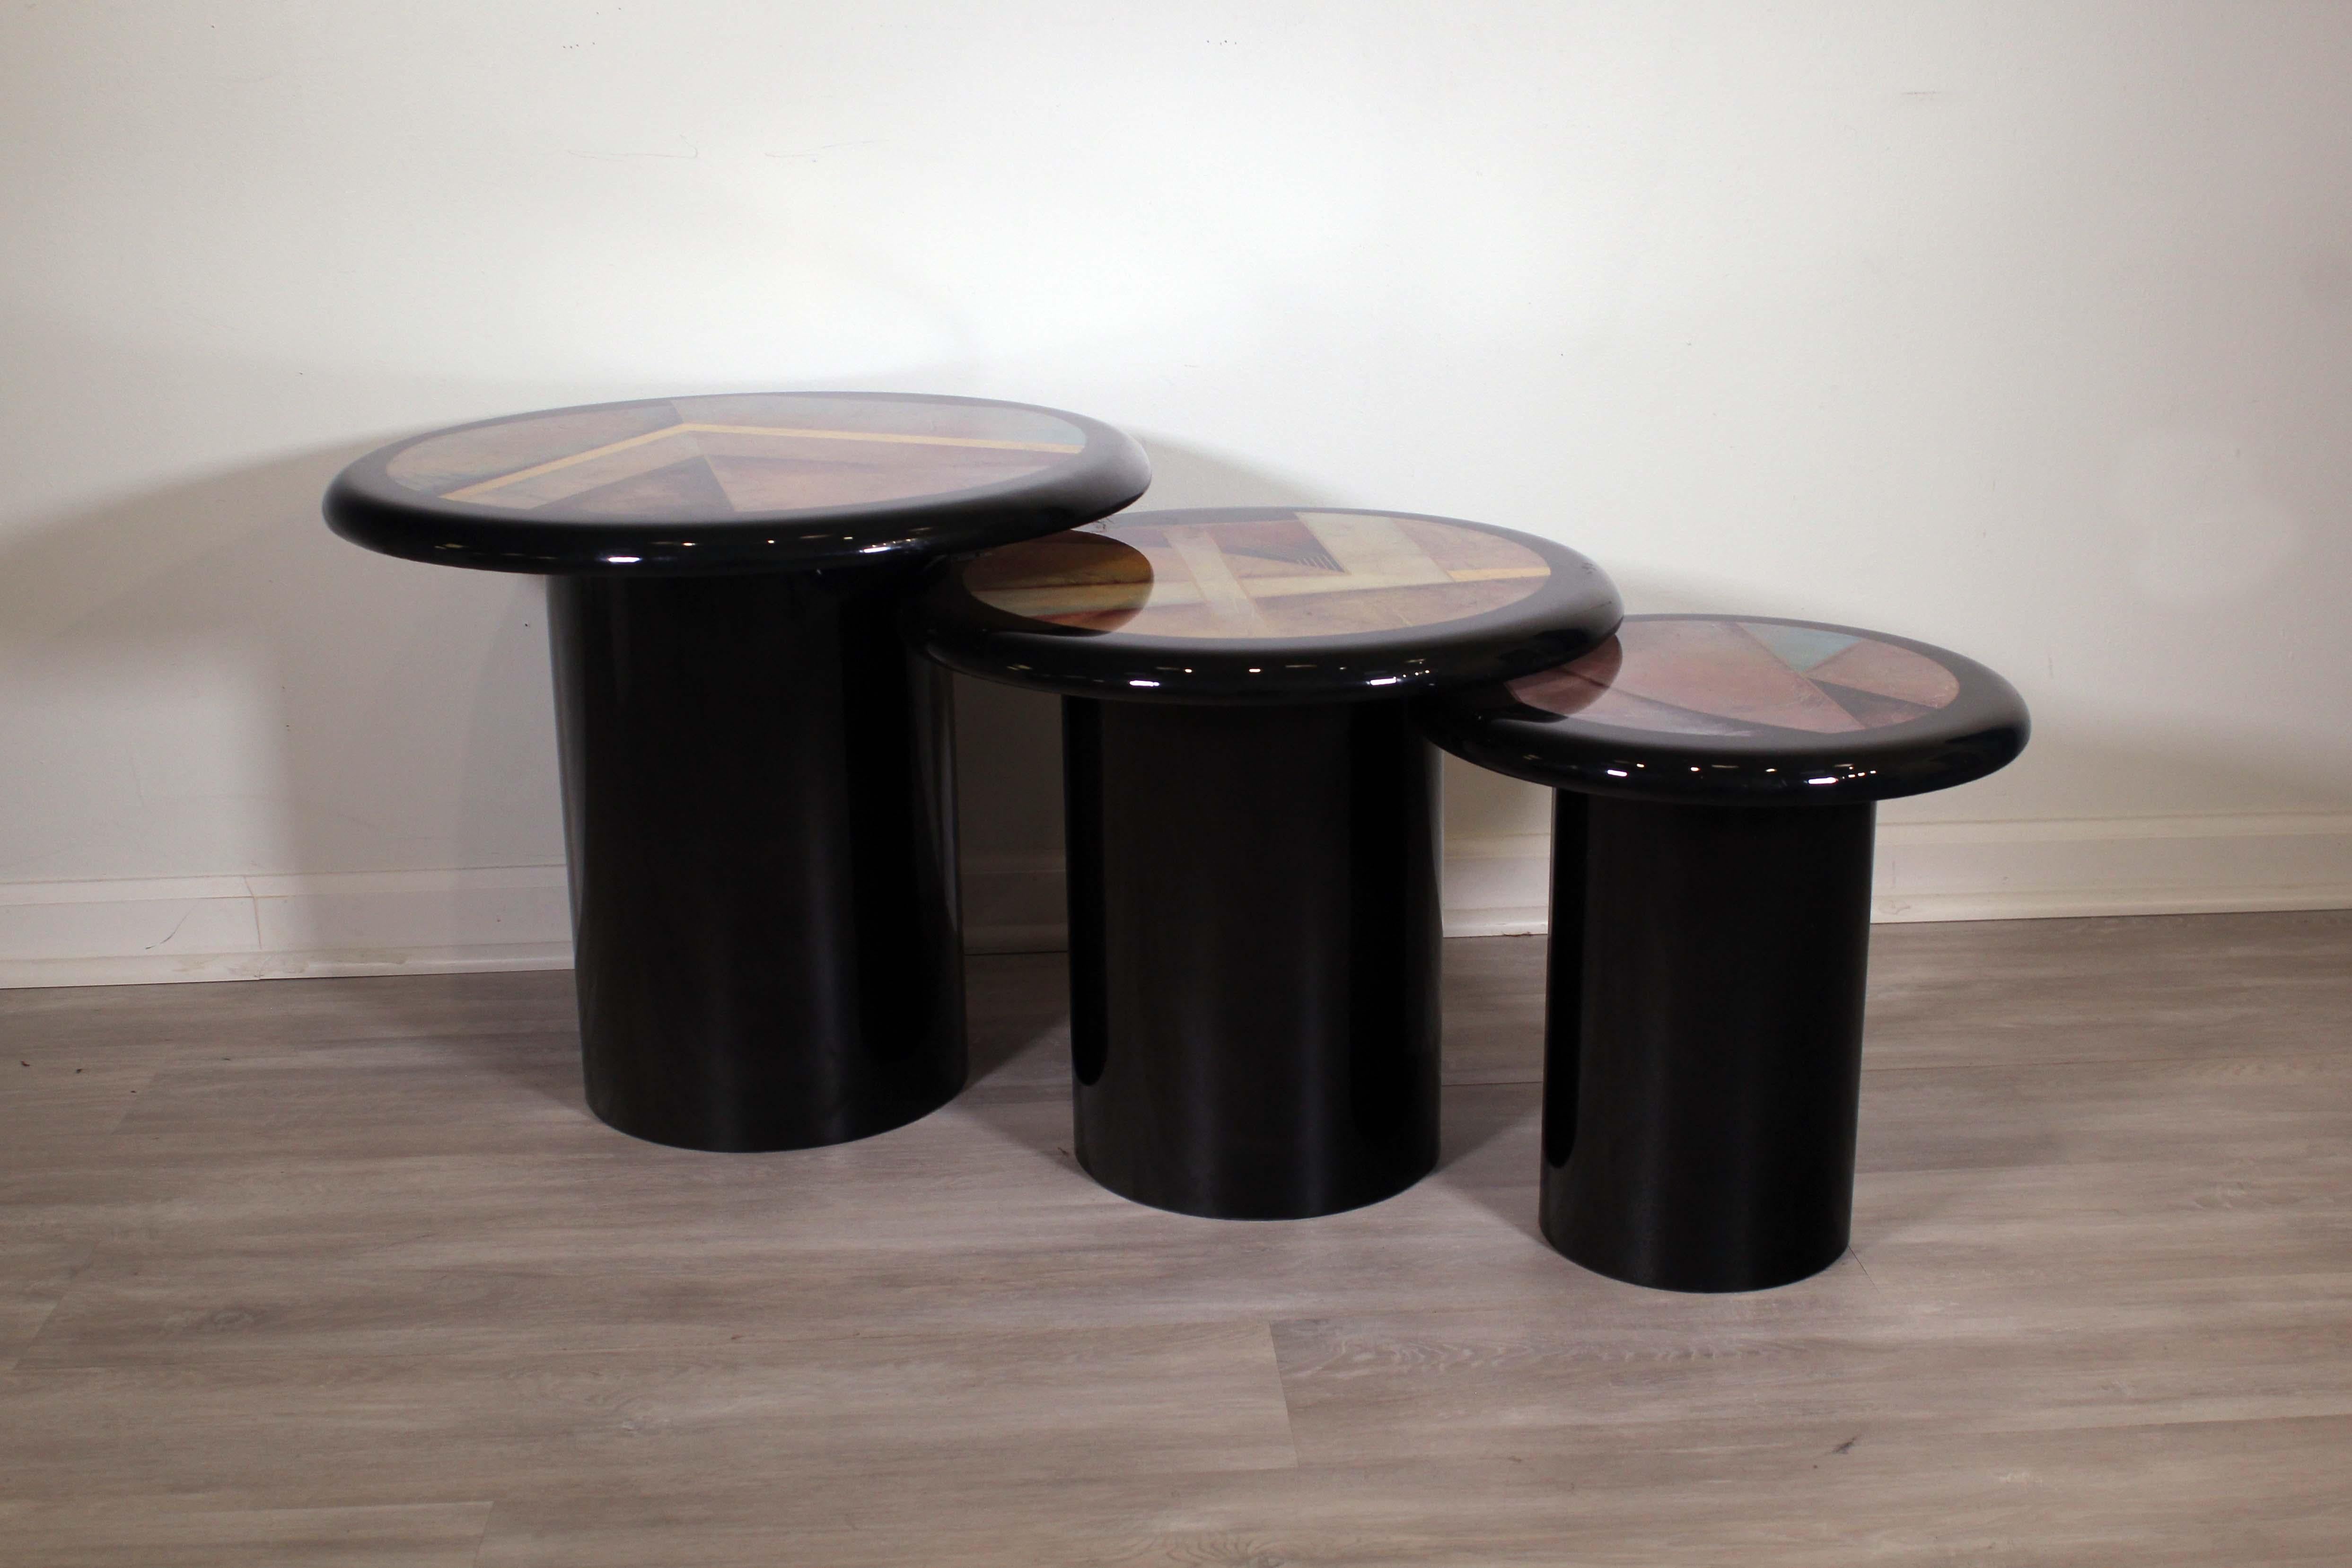 This set of 3 Milano Memphis style pedestal nesting tables is sure to make a statement in your home. The tables feature an eclectic color palette with gold accents on the top adding a hint of glamour. The sleek and shiny finish makes these tables